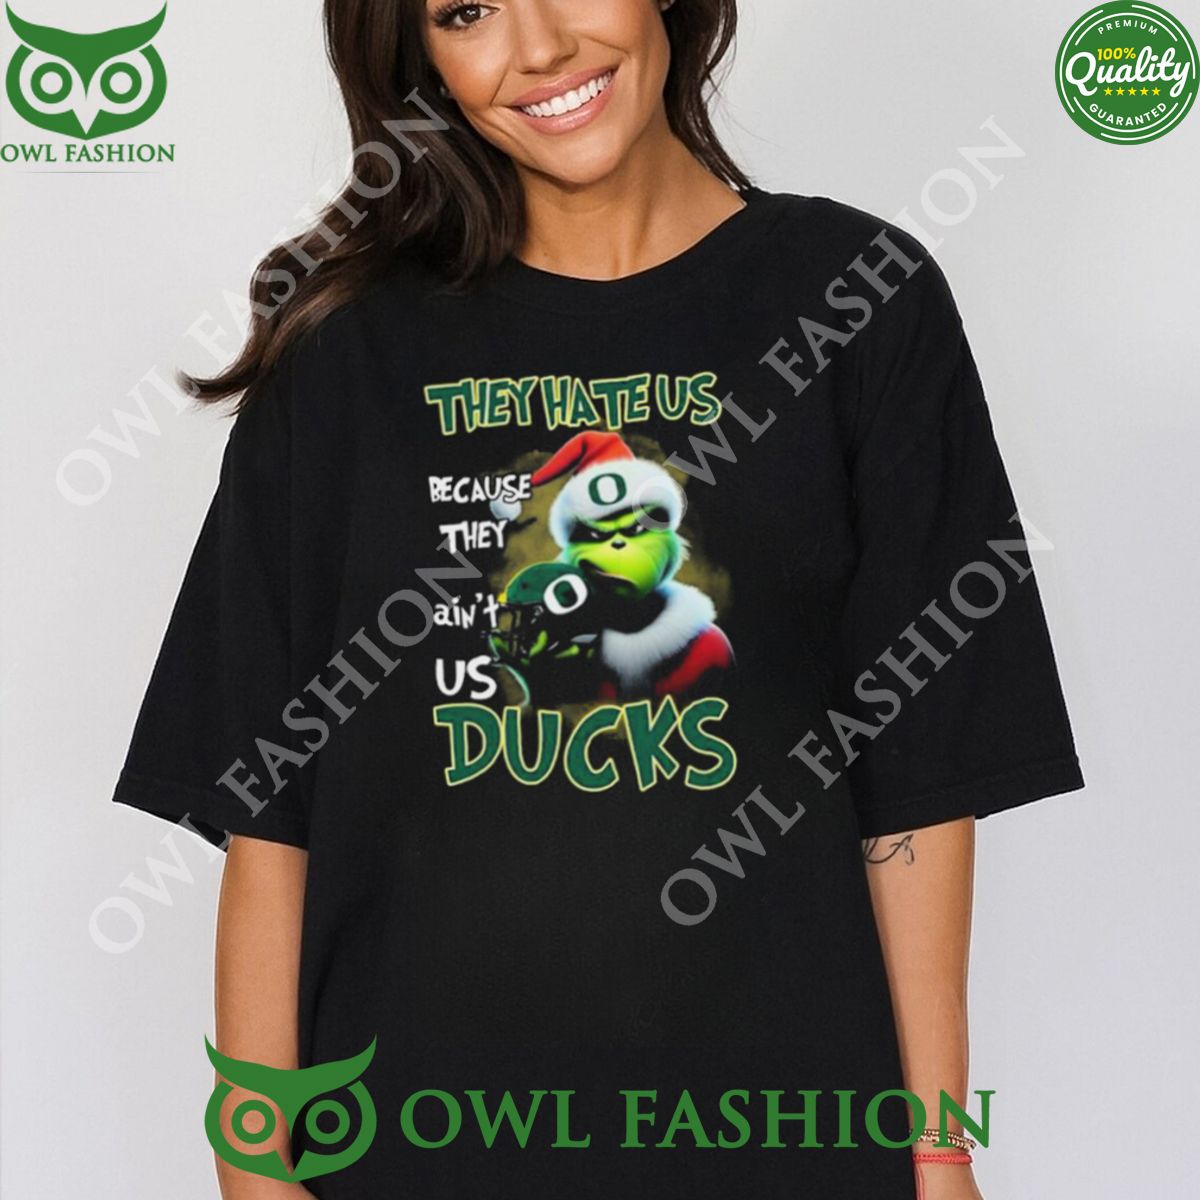 They Hate Us Because Ain’t Us Ducks Santa Grinch Christmas t Shirt